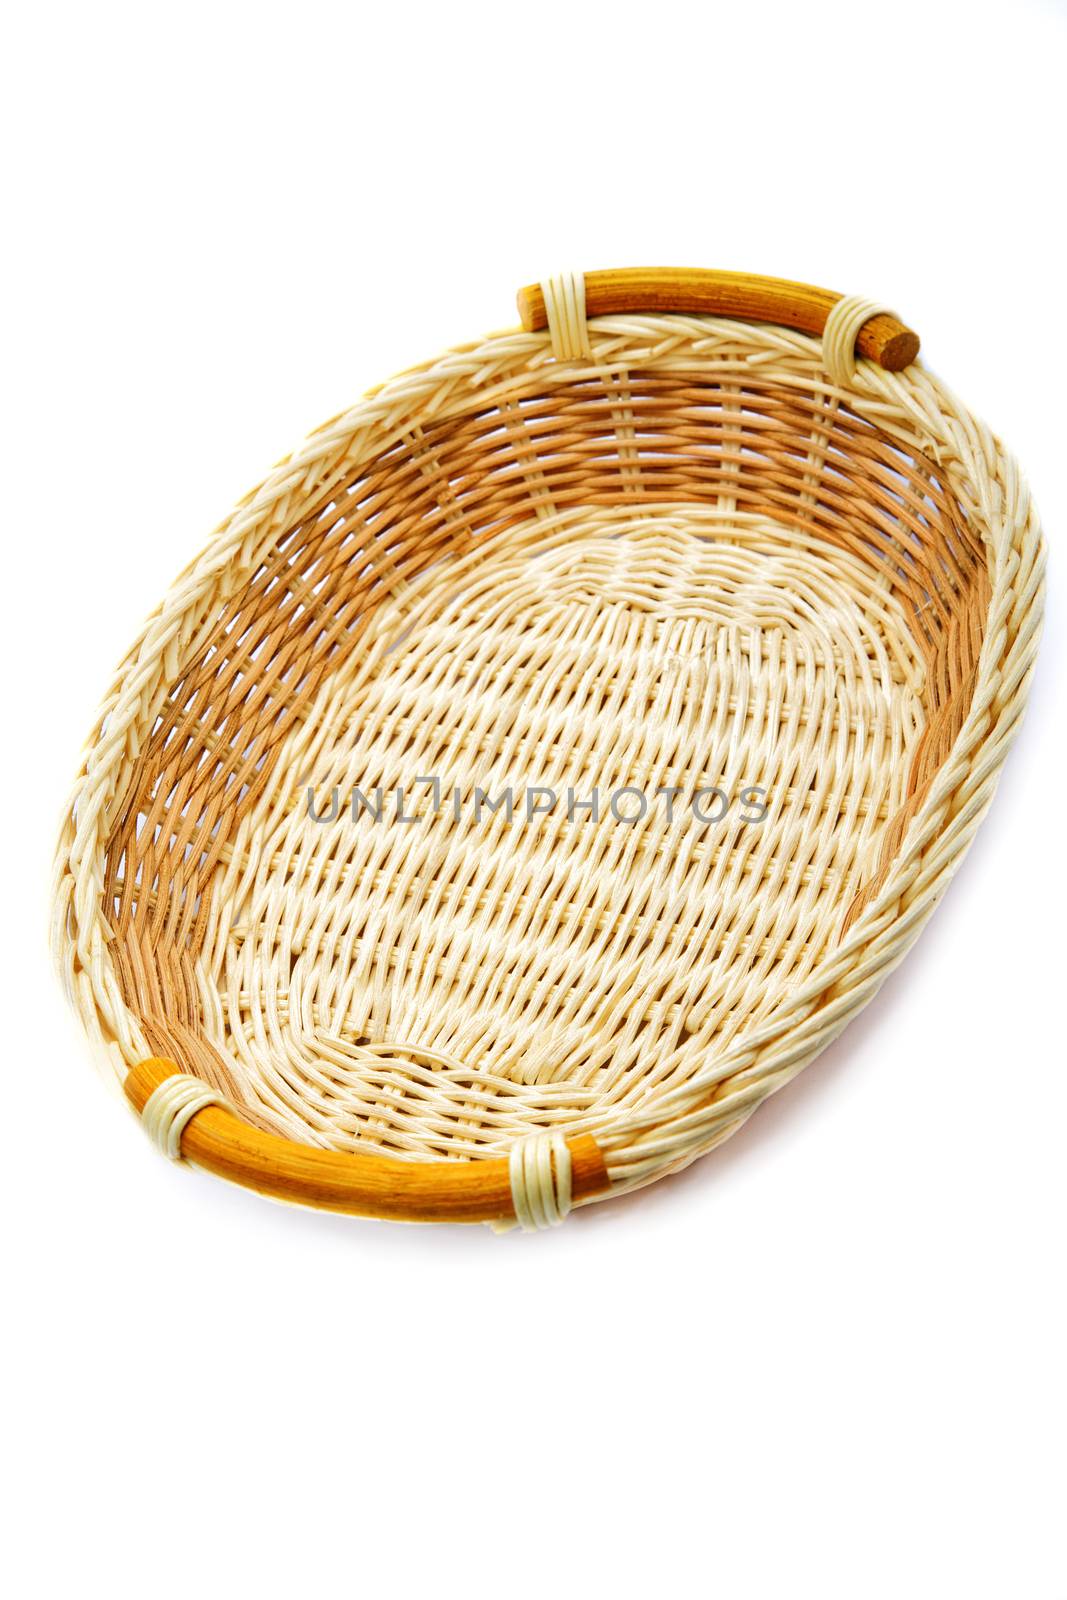 Wattled basket isolated on a white background by alarich